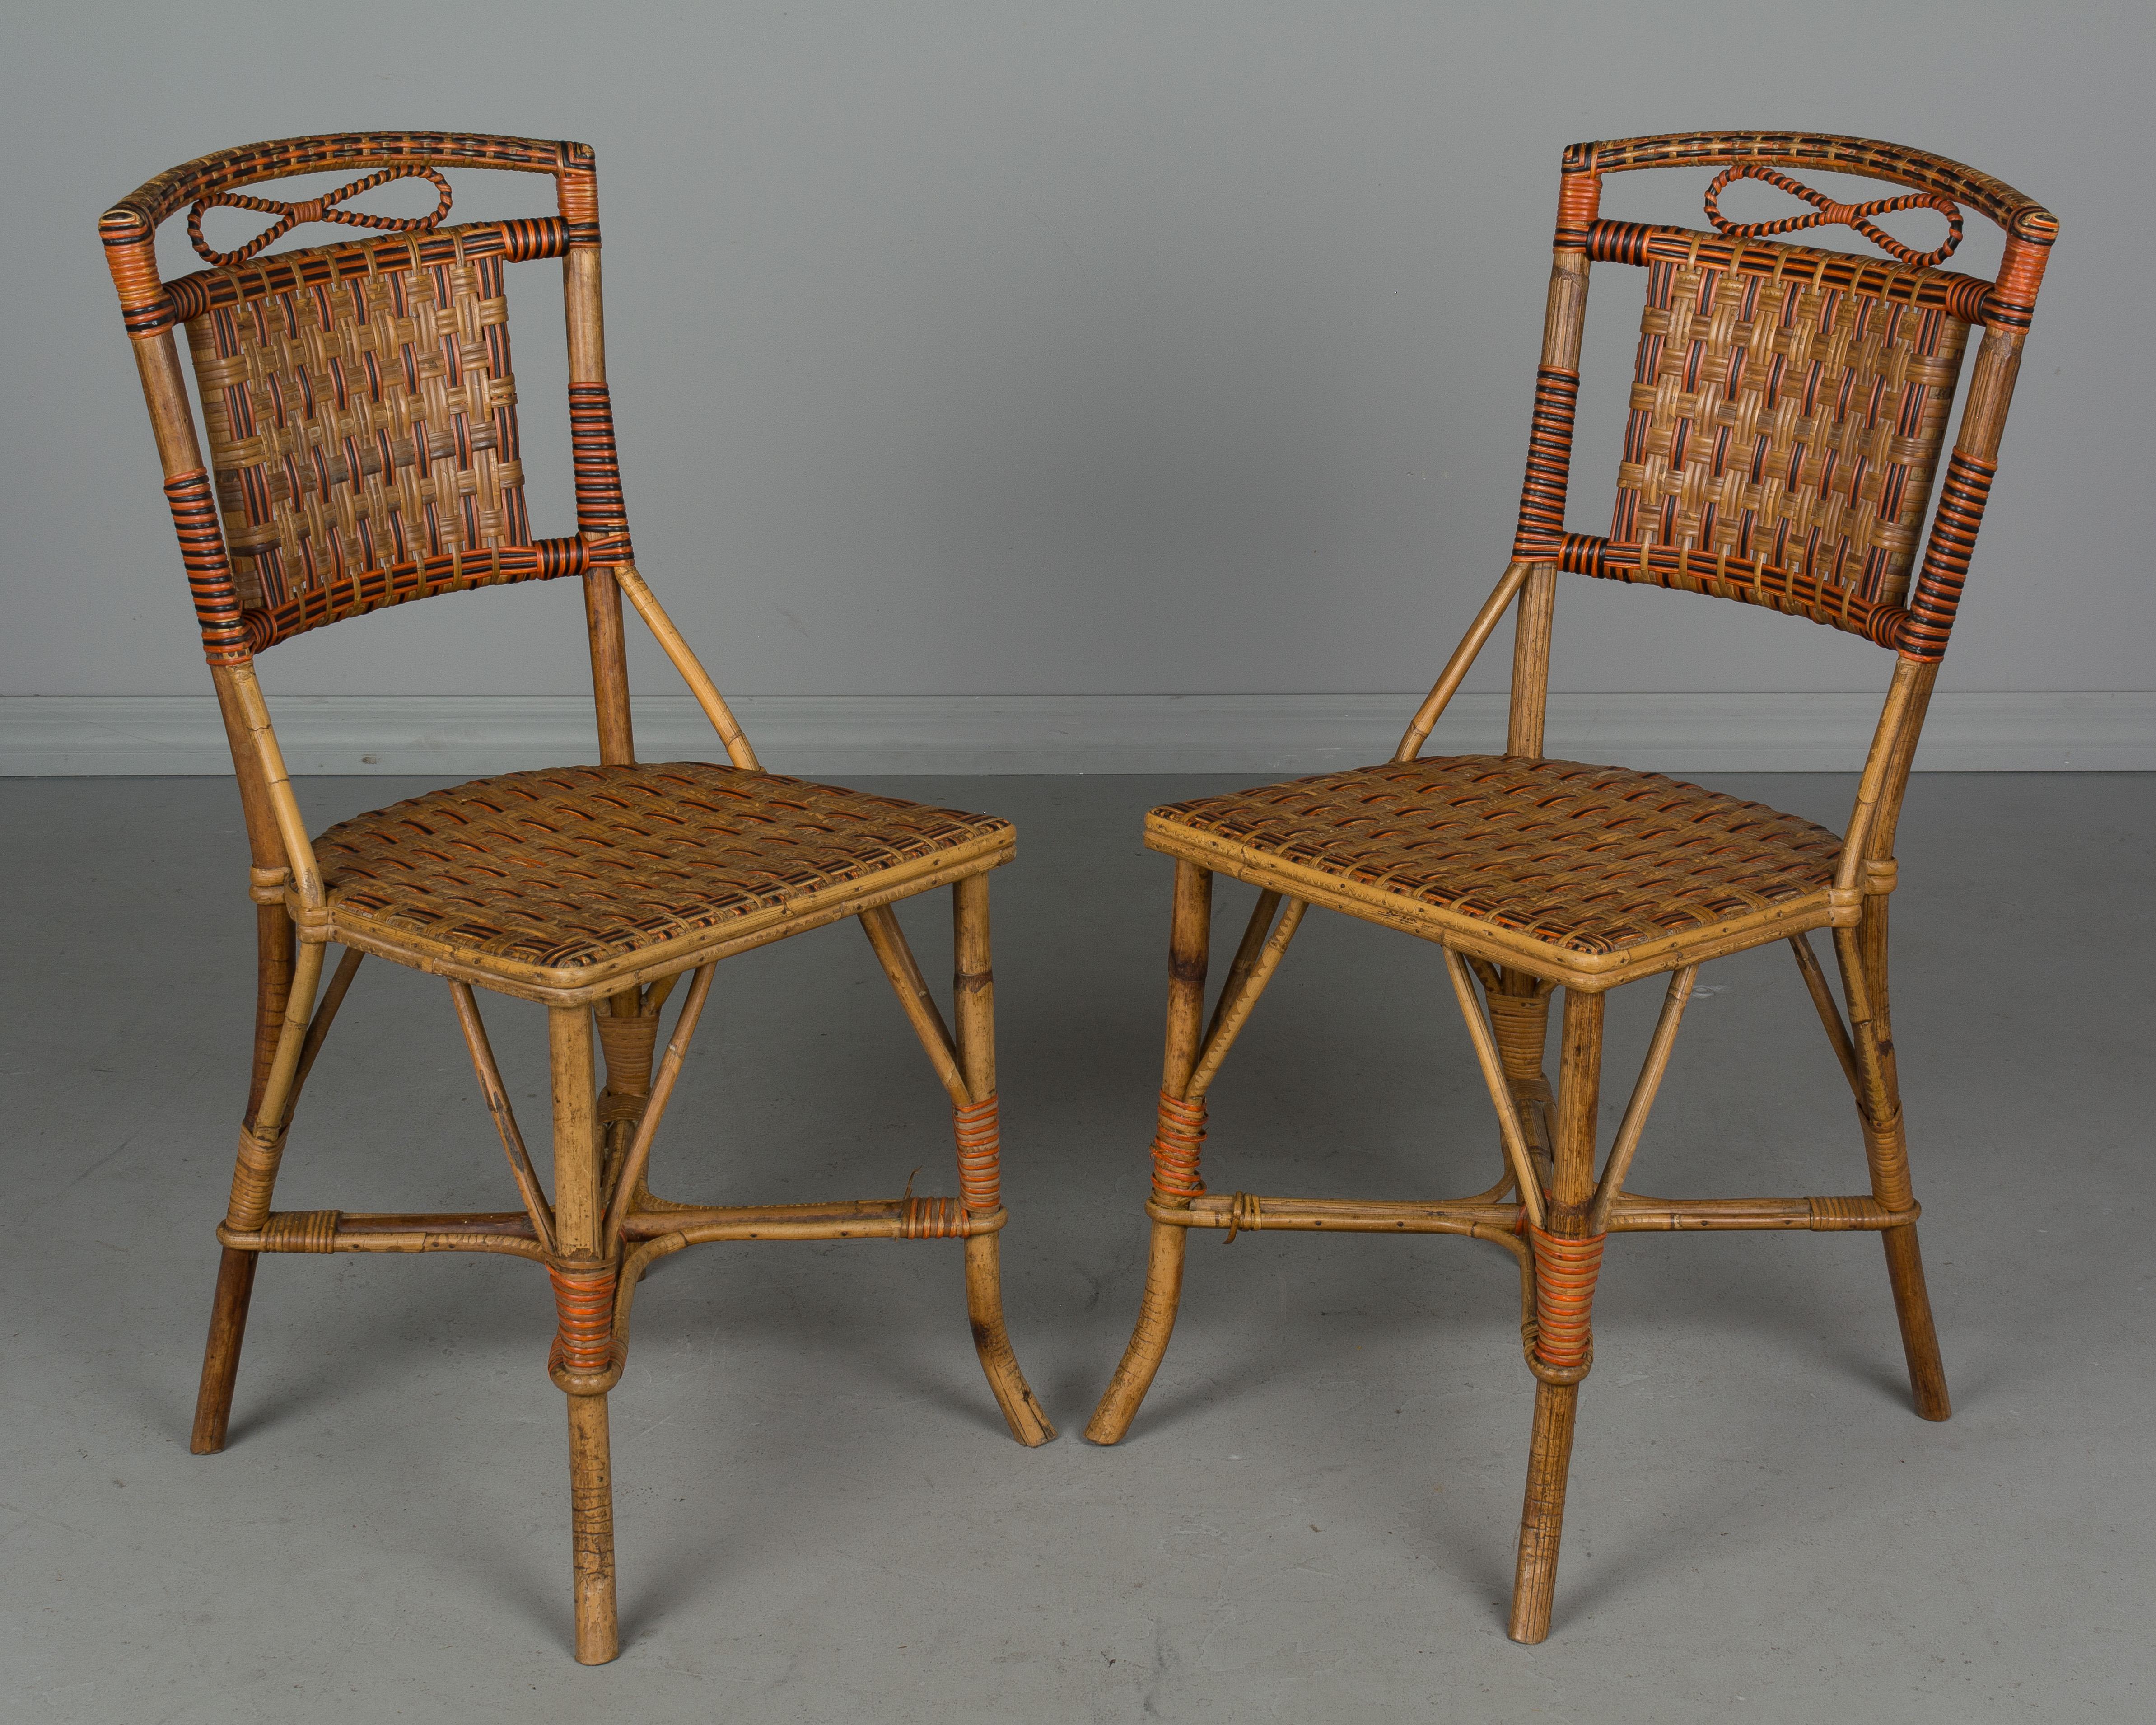 19th Century French Wicker Rattan Dining Set 10